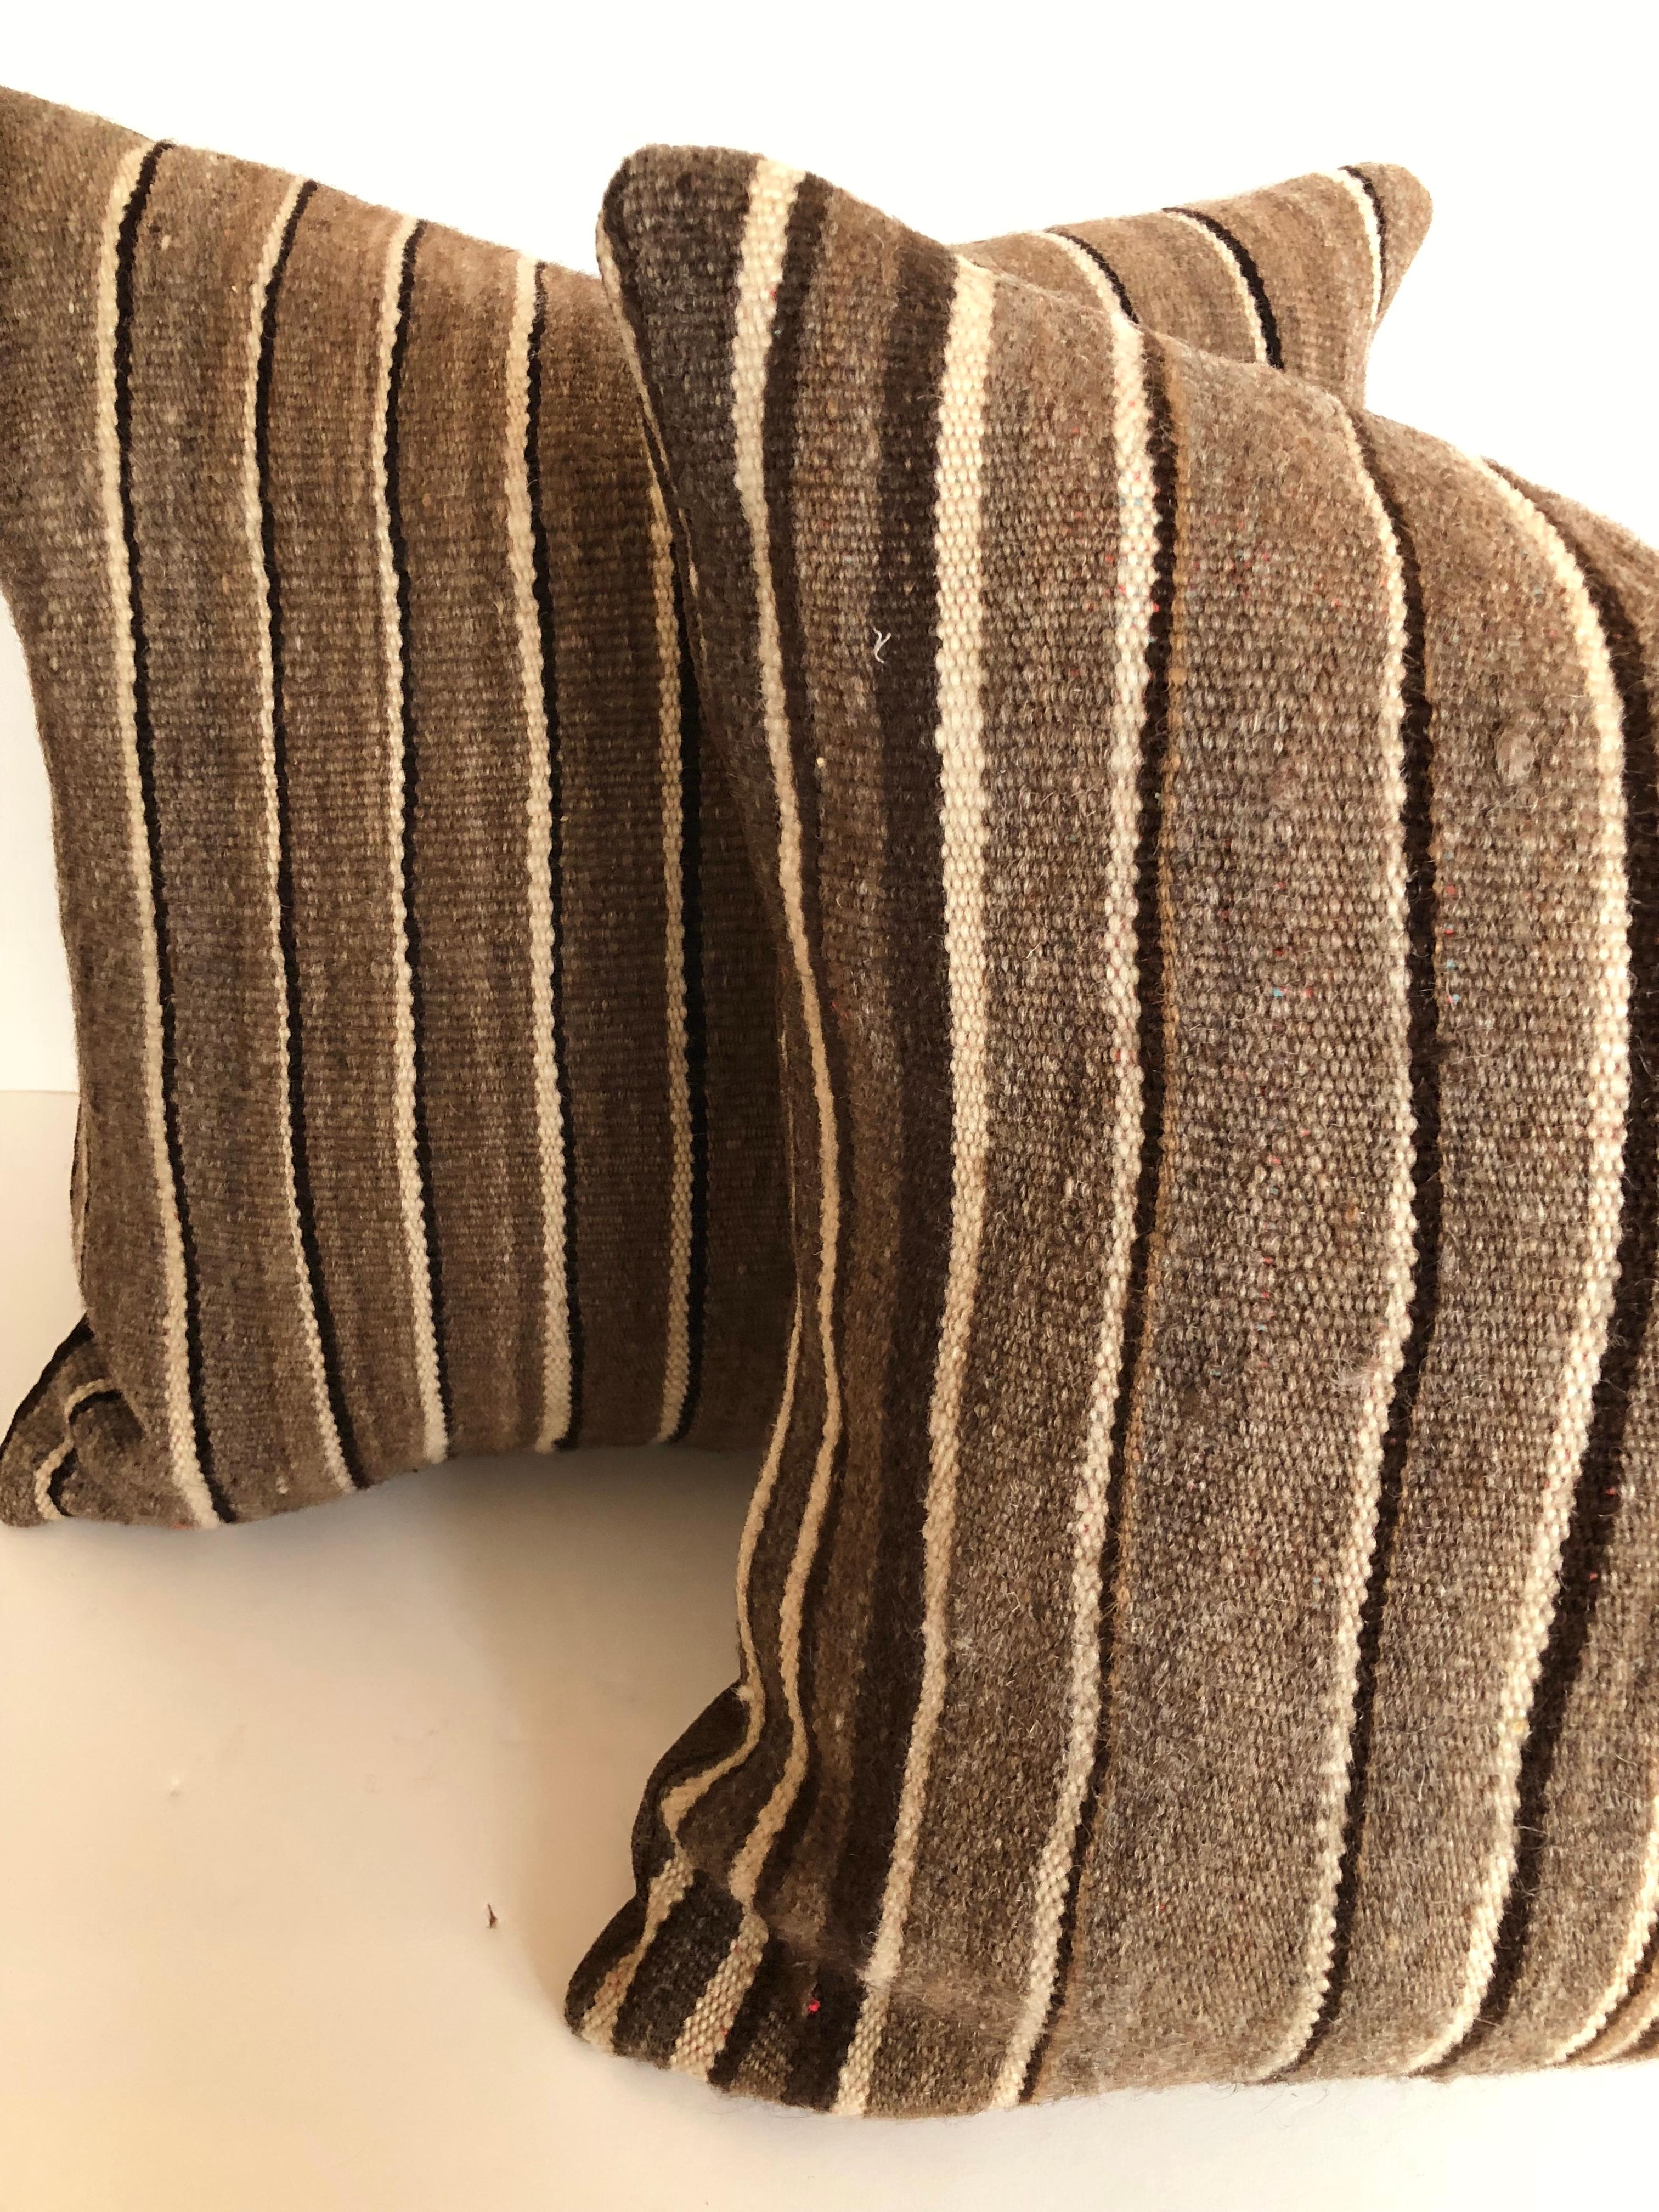 Custom pillows cut from a vintage hand loomed wool Moroccan Berber rug from the Atlas Mountains. Wool is soft and lustrous with stripes in shades of brown. Pillows are backed in dark brown linen blend, filled with inserts of 50/50 down and feathers